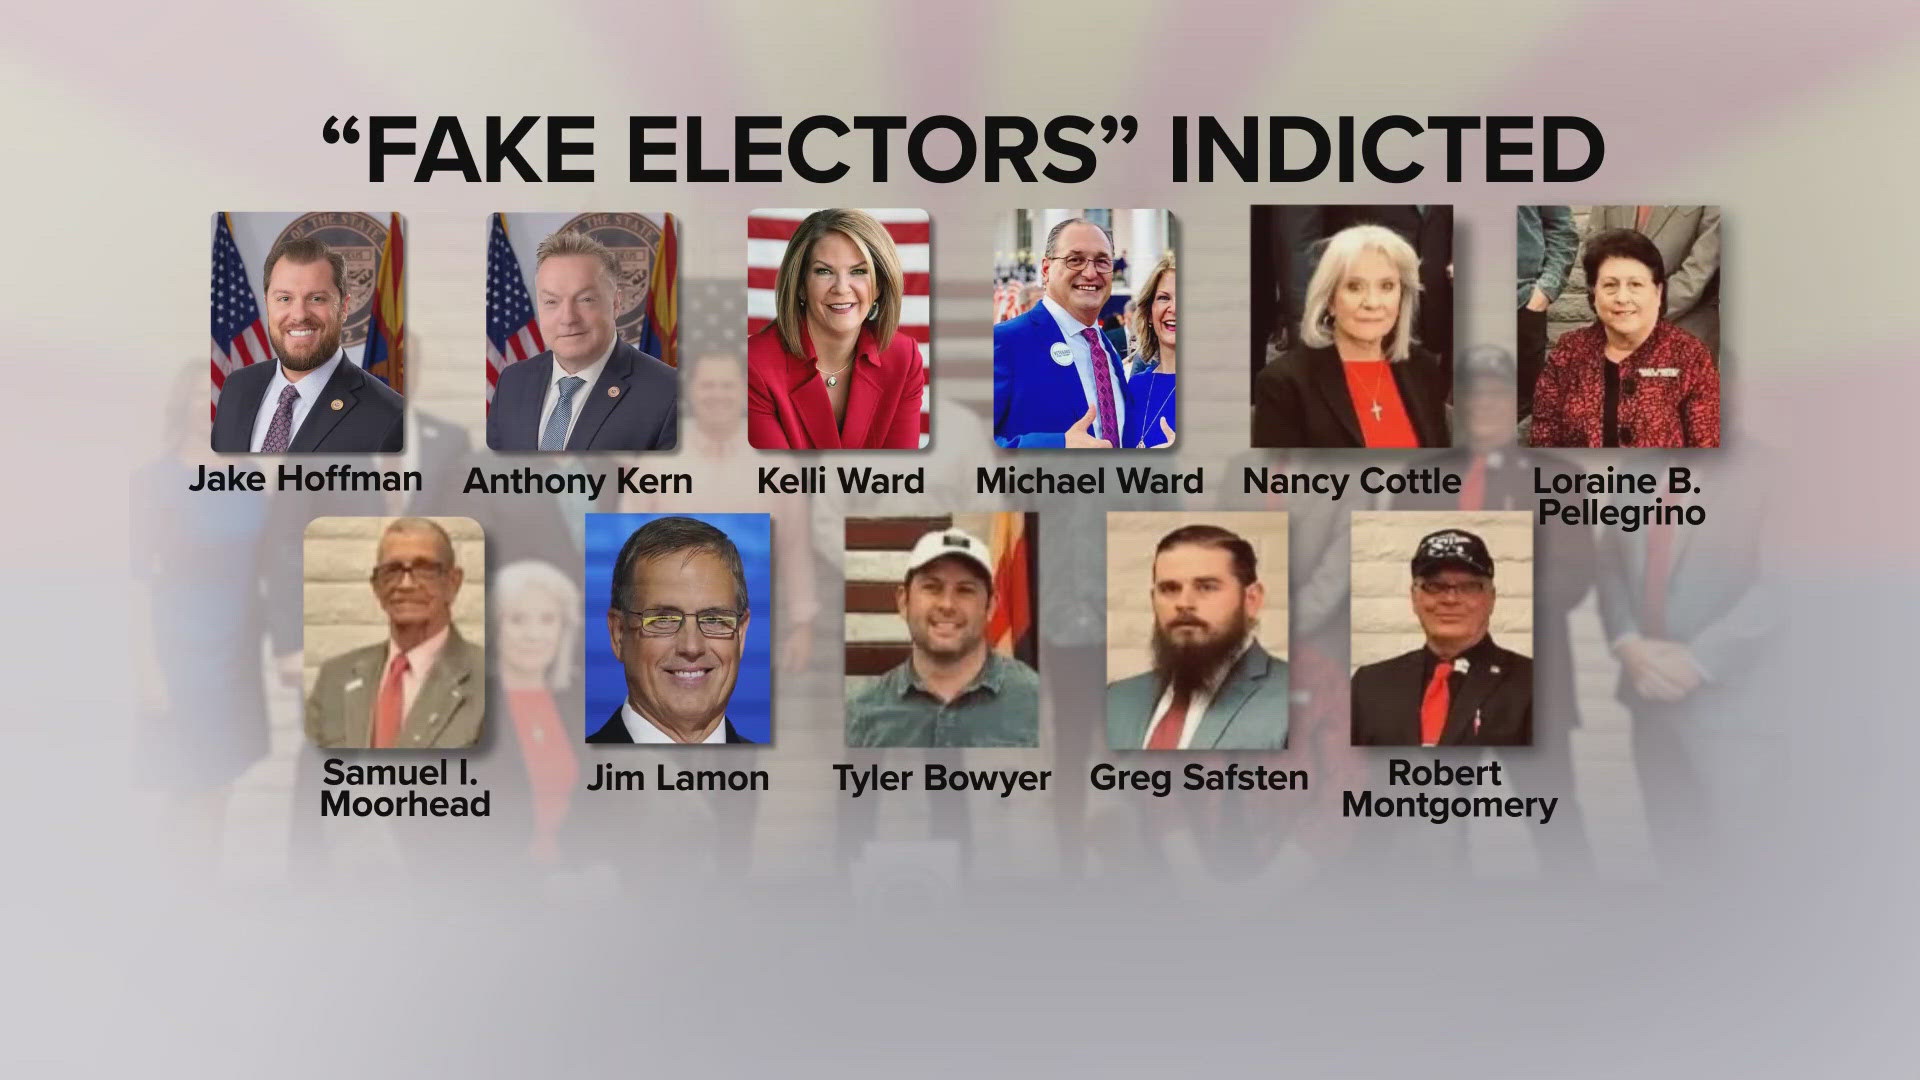 Arizona's "fake electors" were charged with conspiracy, forgery and fraudulent schemes. Here's why they were indicted.